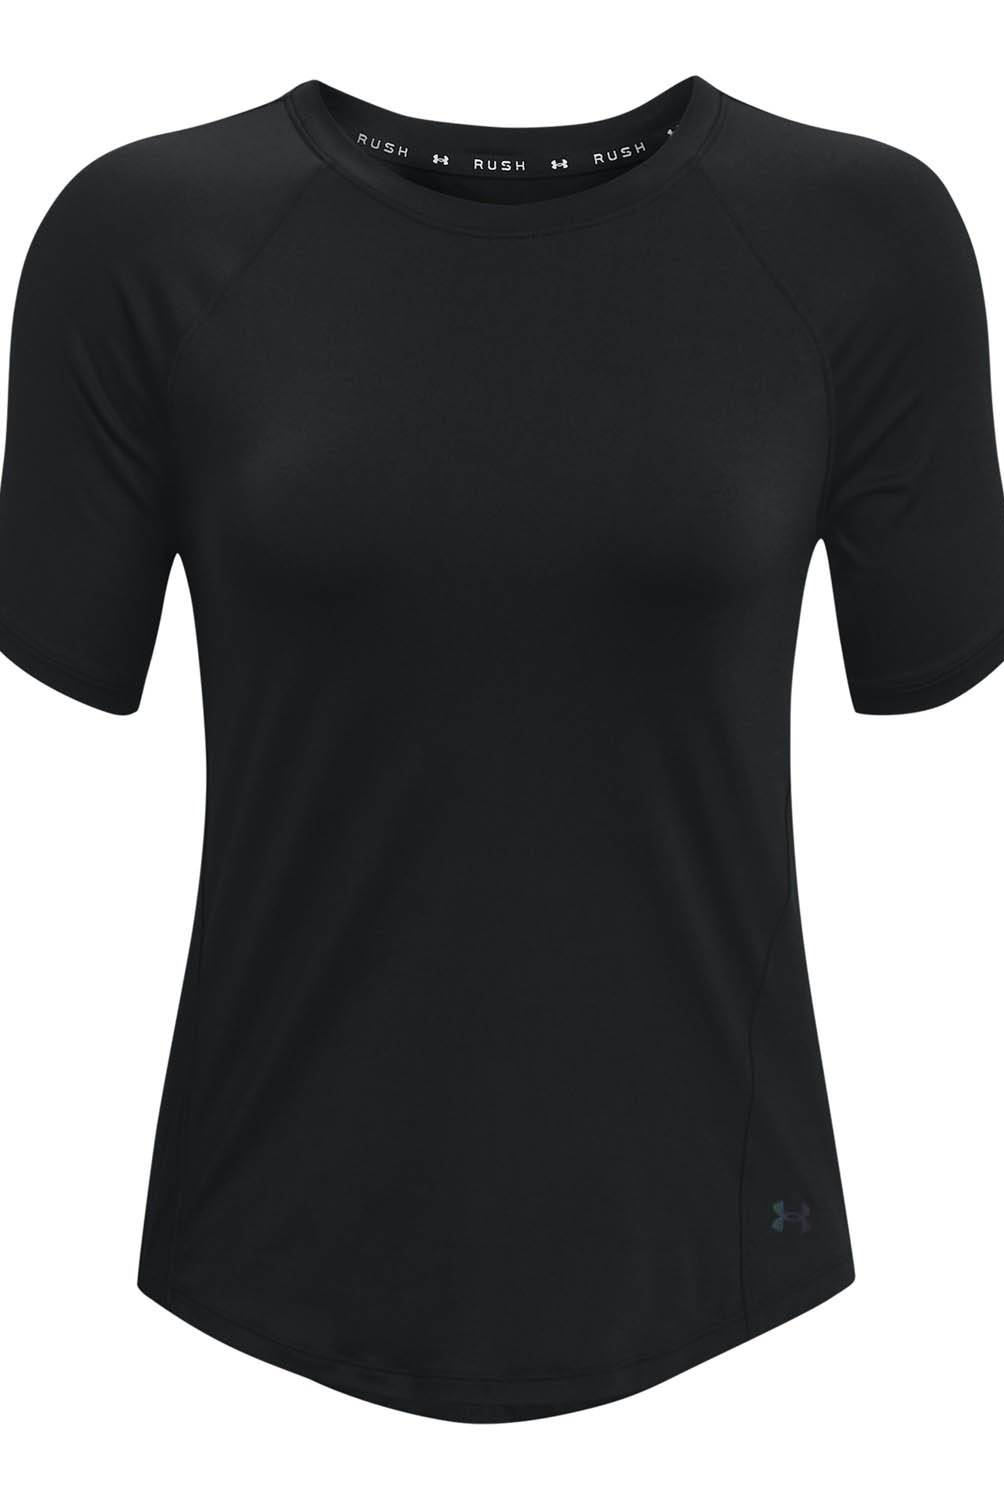 UNDER ARMOUR - Sports t-shirts mujer